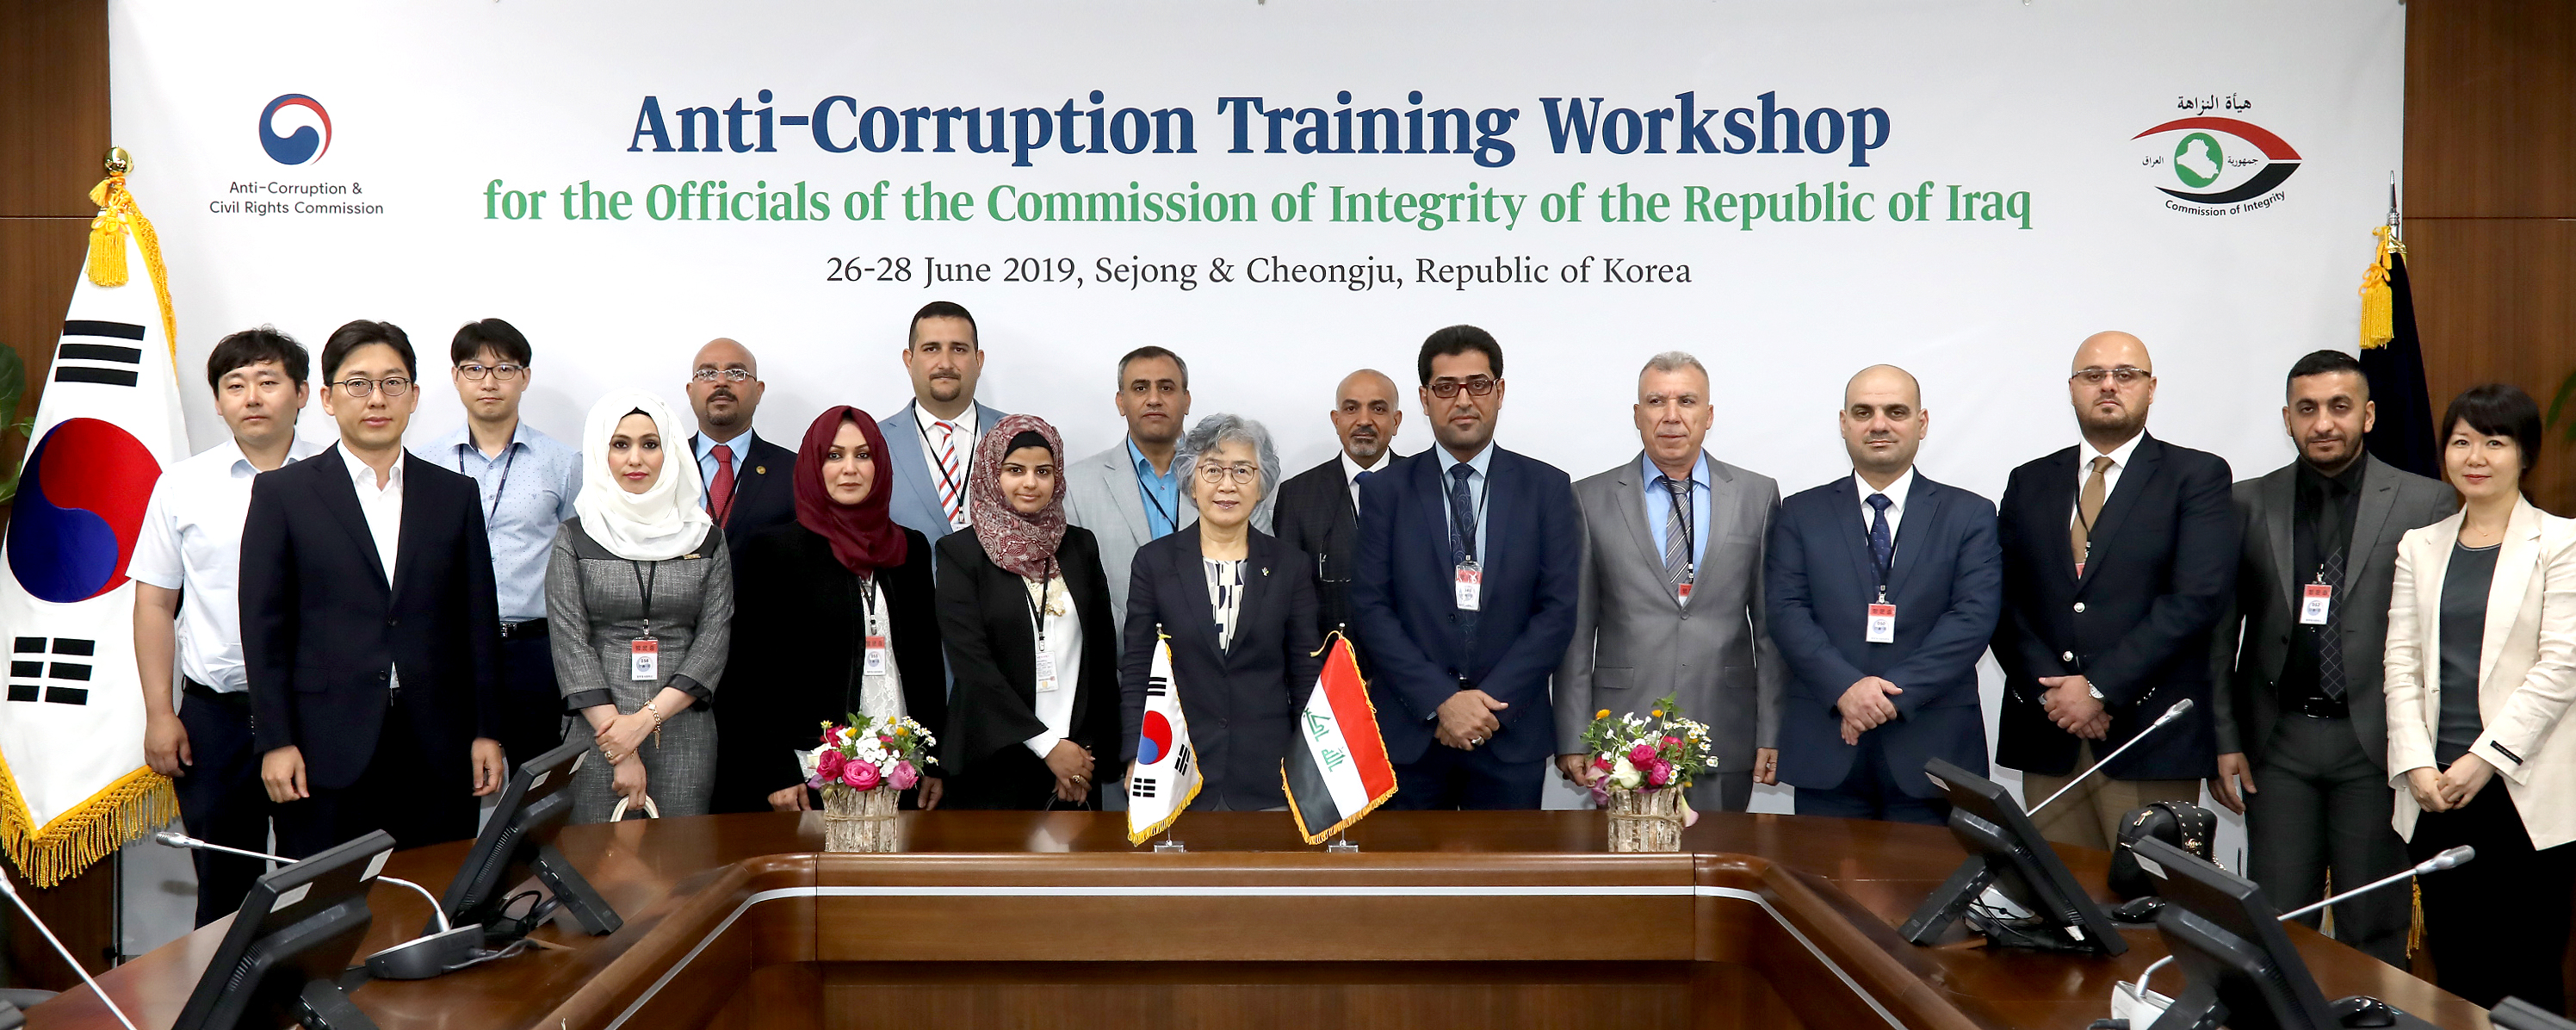 A delegation from the Iraqi anti-corruption body visited Korea to attend the anti-corruption training workshop to be held for four days from June 26th.